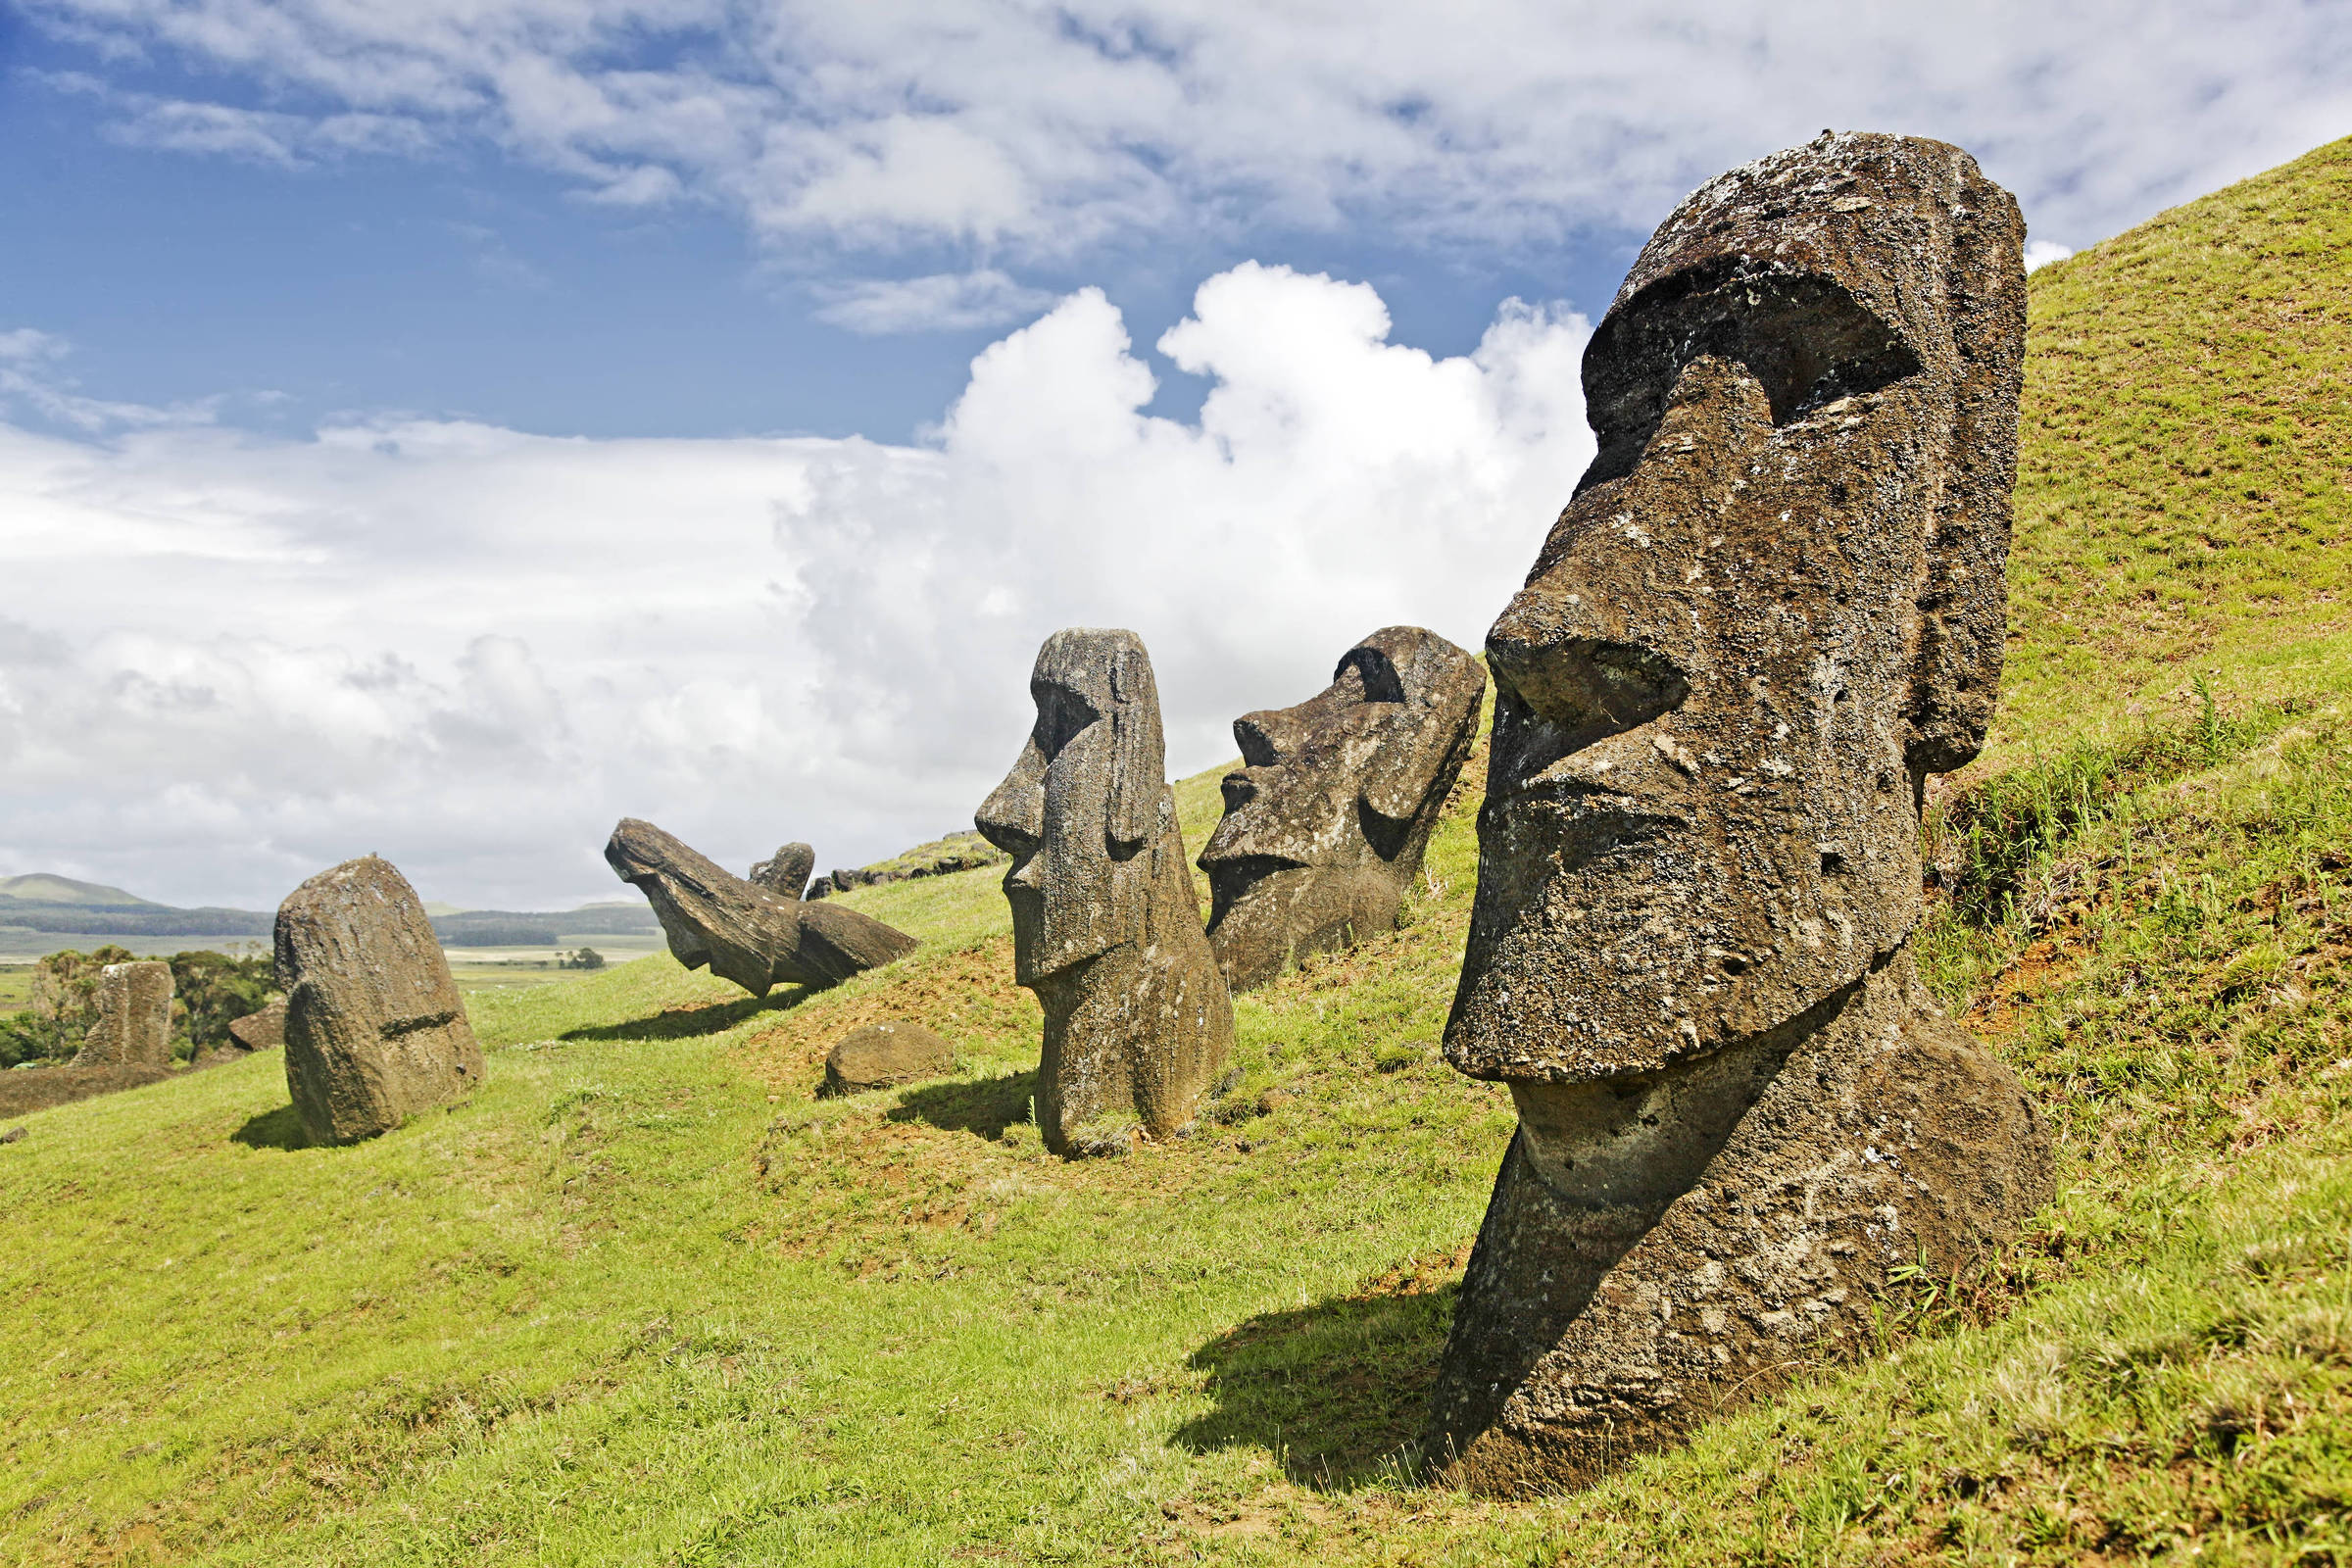 Opinion – Ronaldo Lemos: Easter Island: lessons from the navel of the world